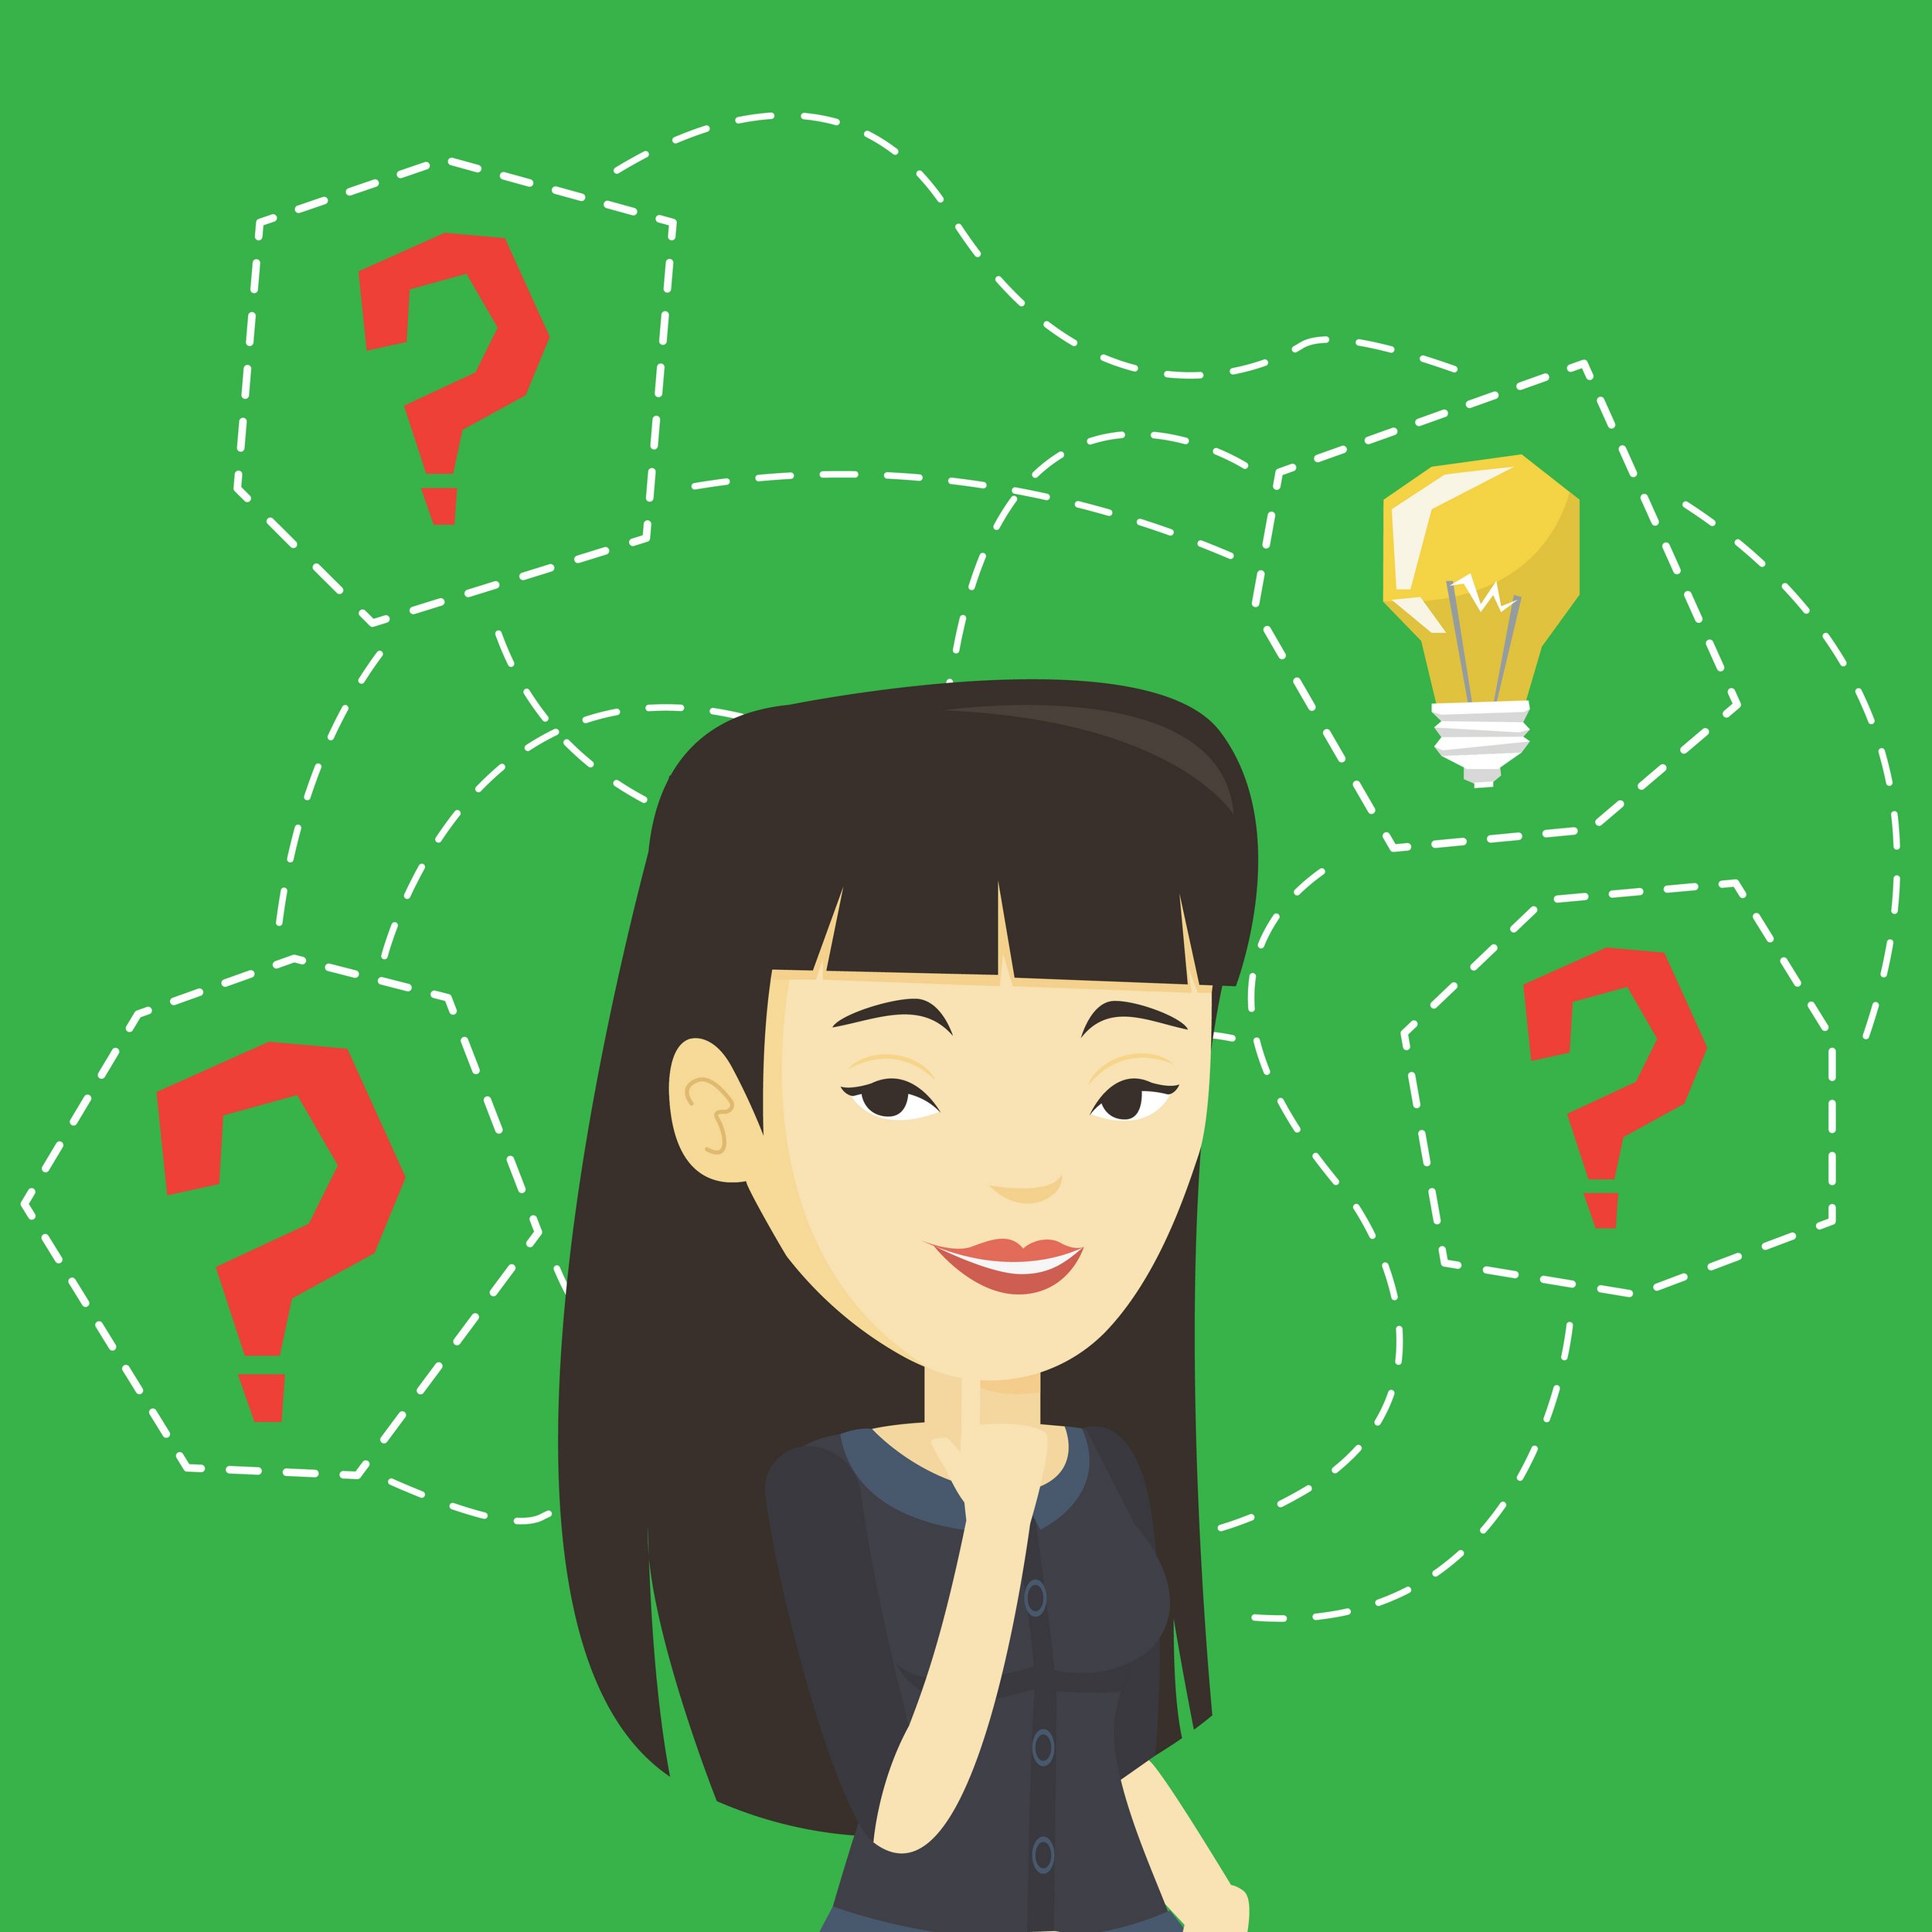 asian-businesswoman-having-creative-idea-business-woman-standing-with-question-marks-a-SBI-309501559.jpg